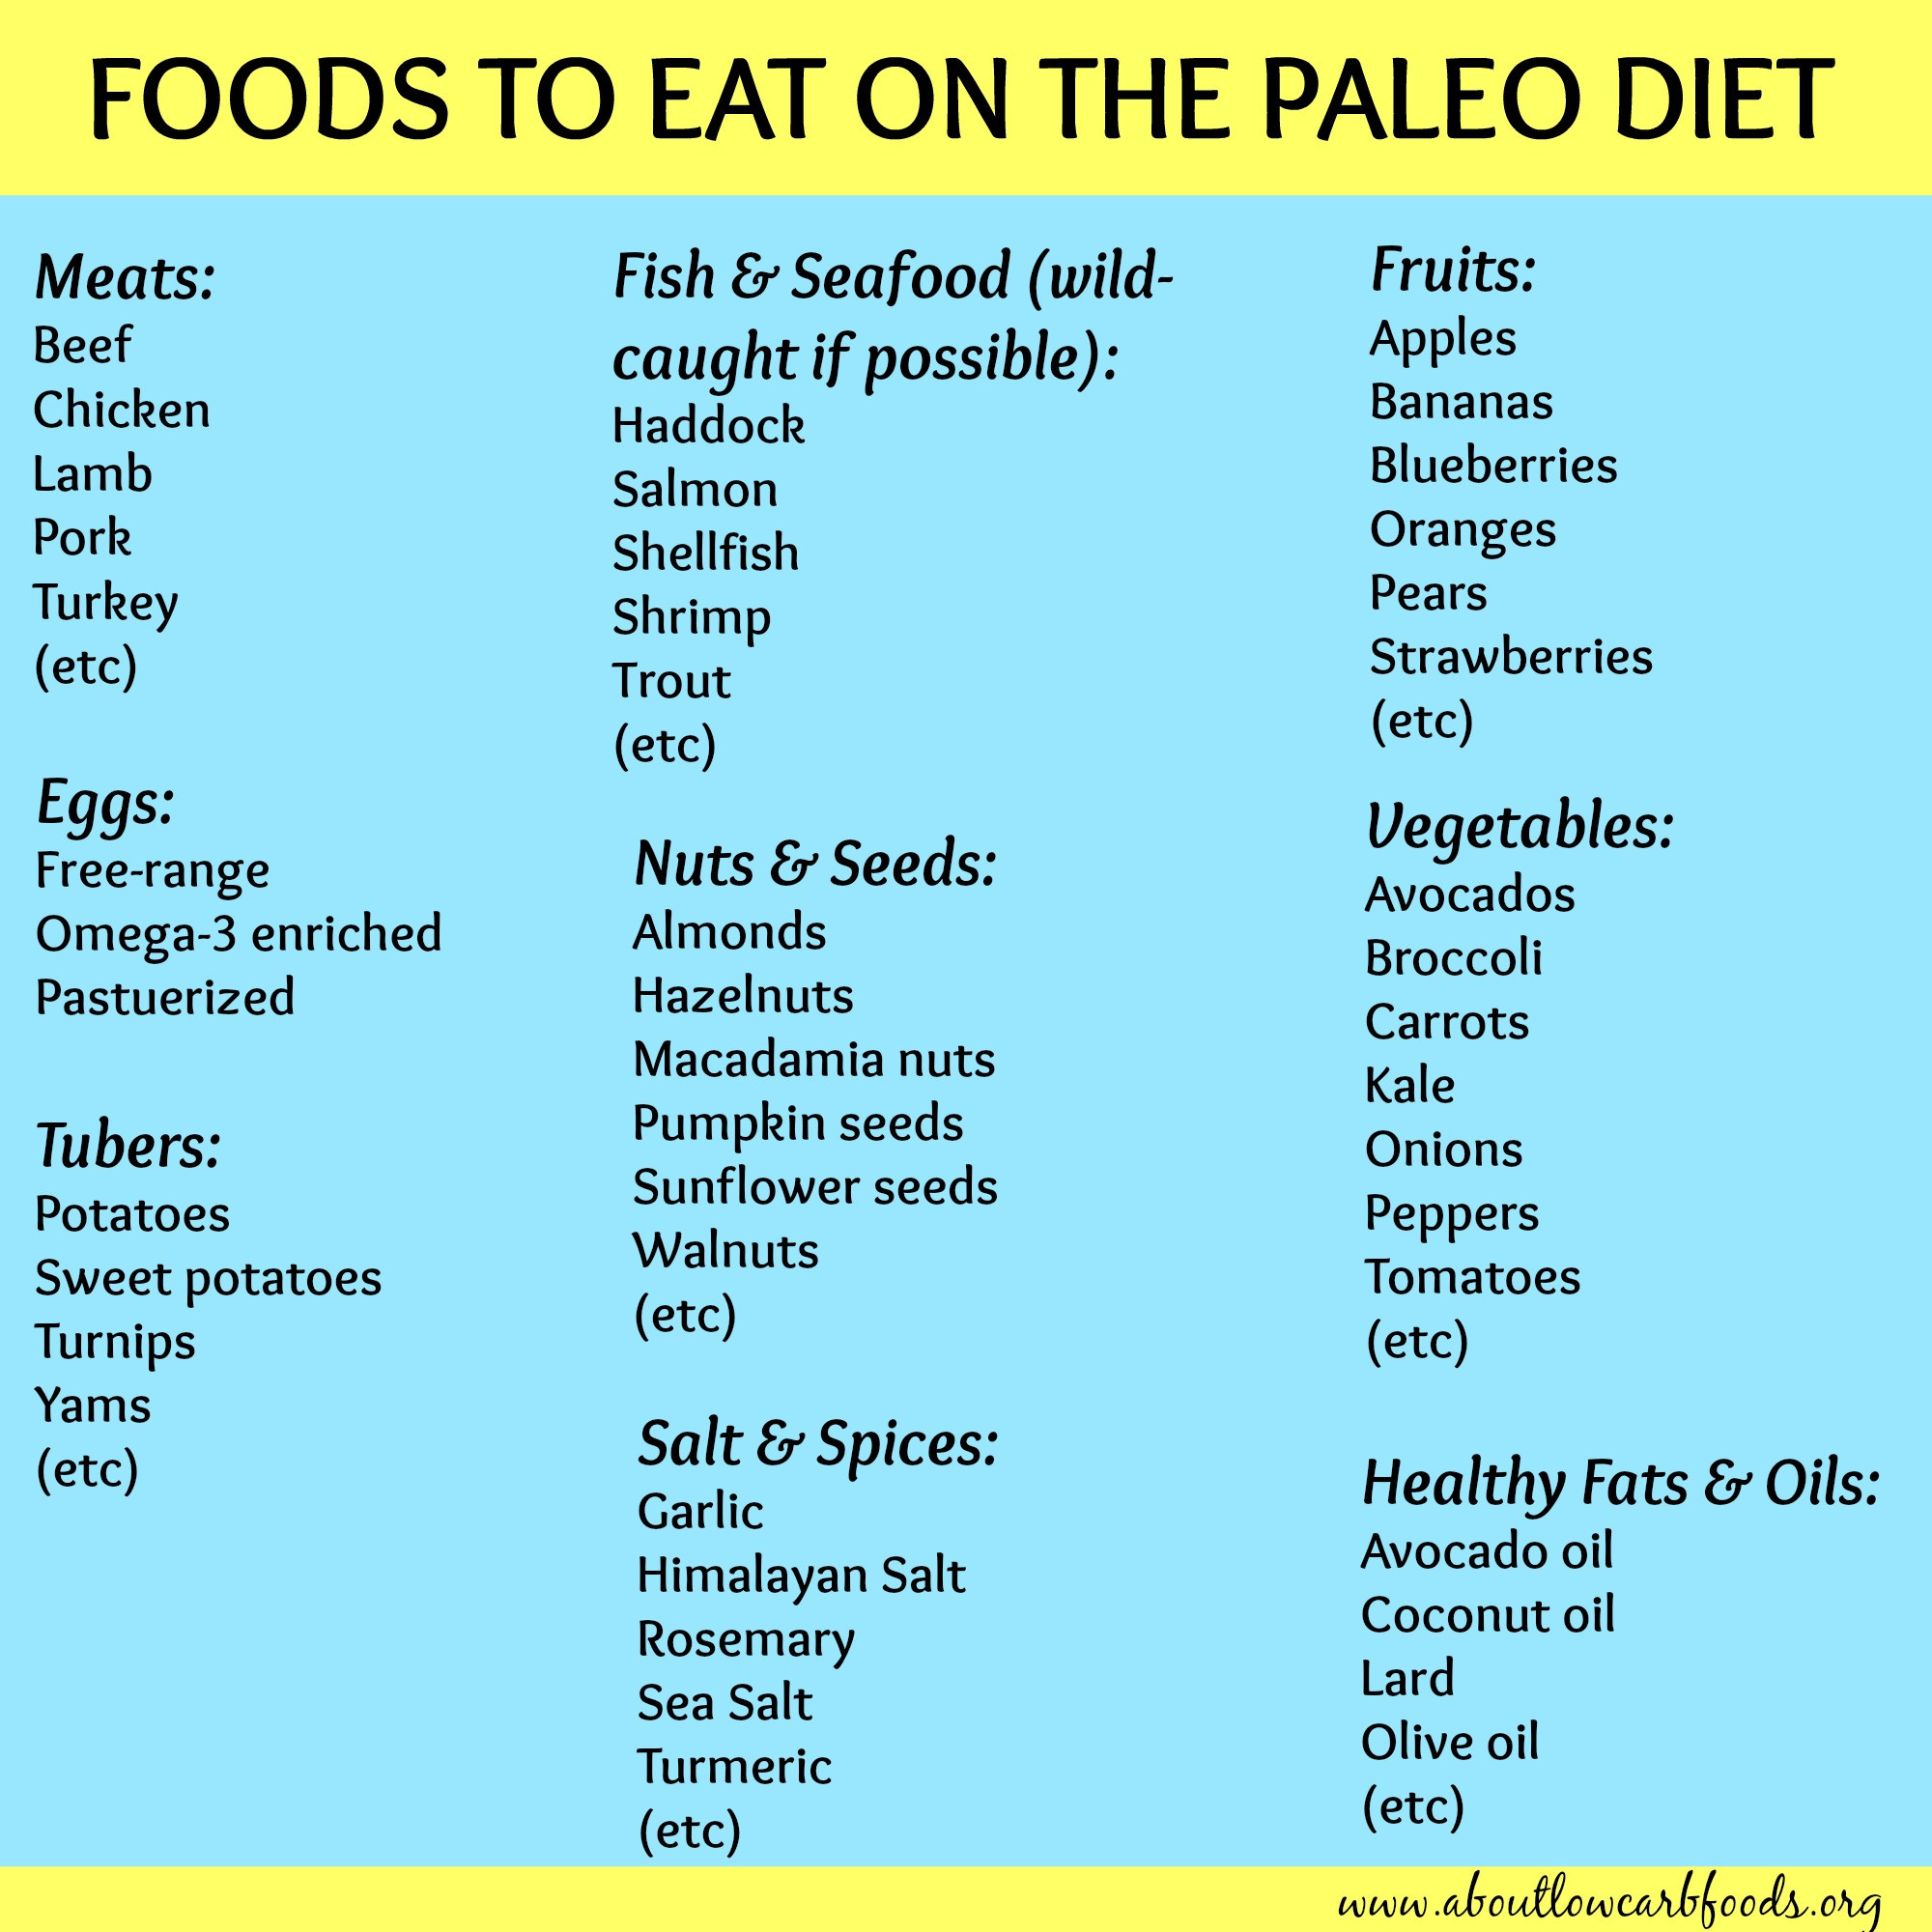 Paleo Diet Menu
 Paleo Diet Meal Plan Why It’s So Popular About Low Carb